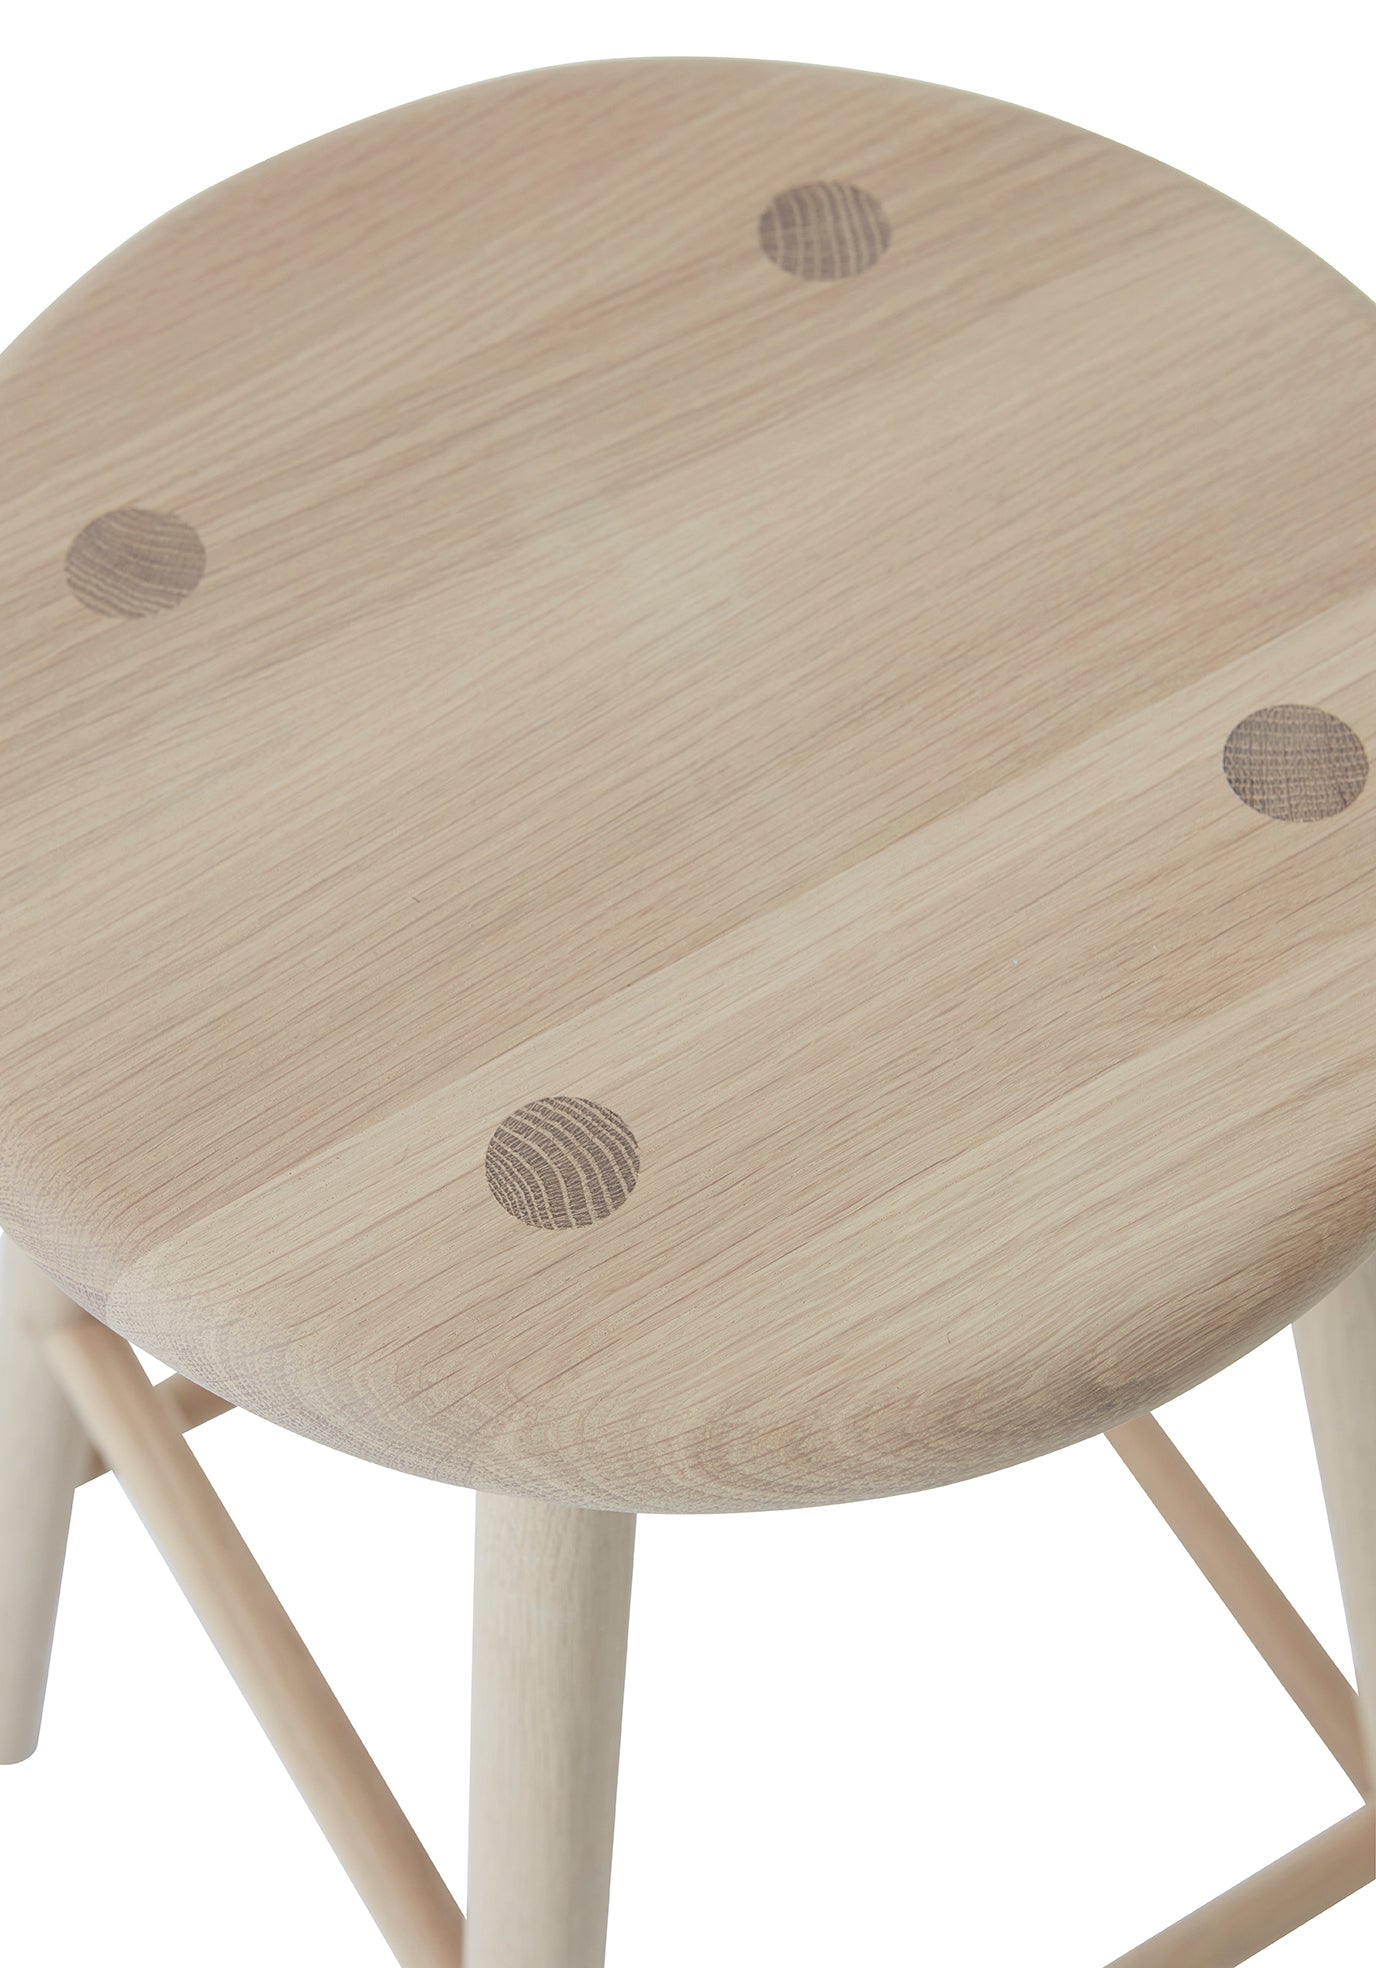 Load image into Gallery viewer, OYOY LIVING Moto Stool - High Stool 901 Nature
